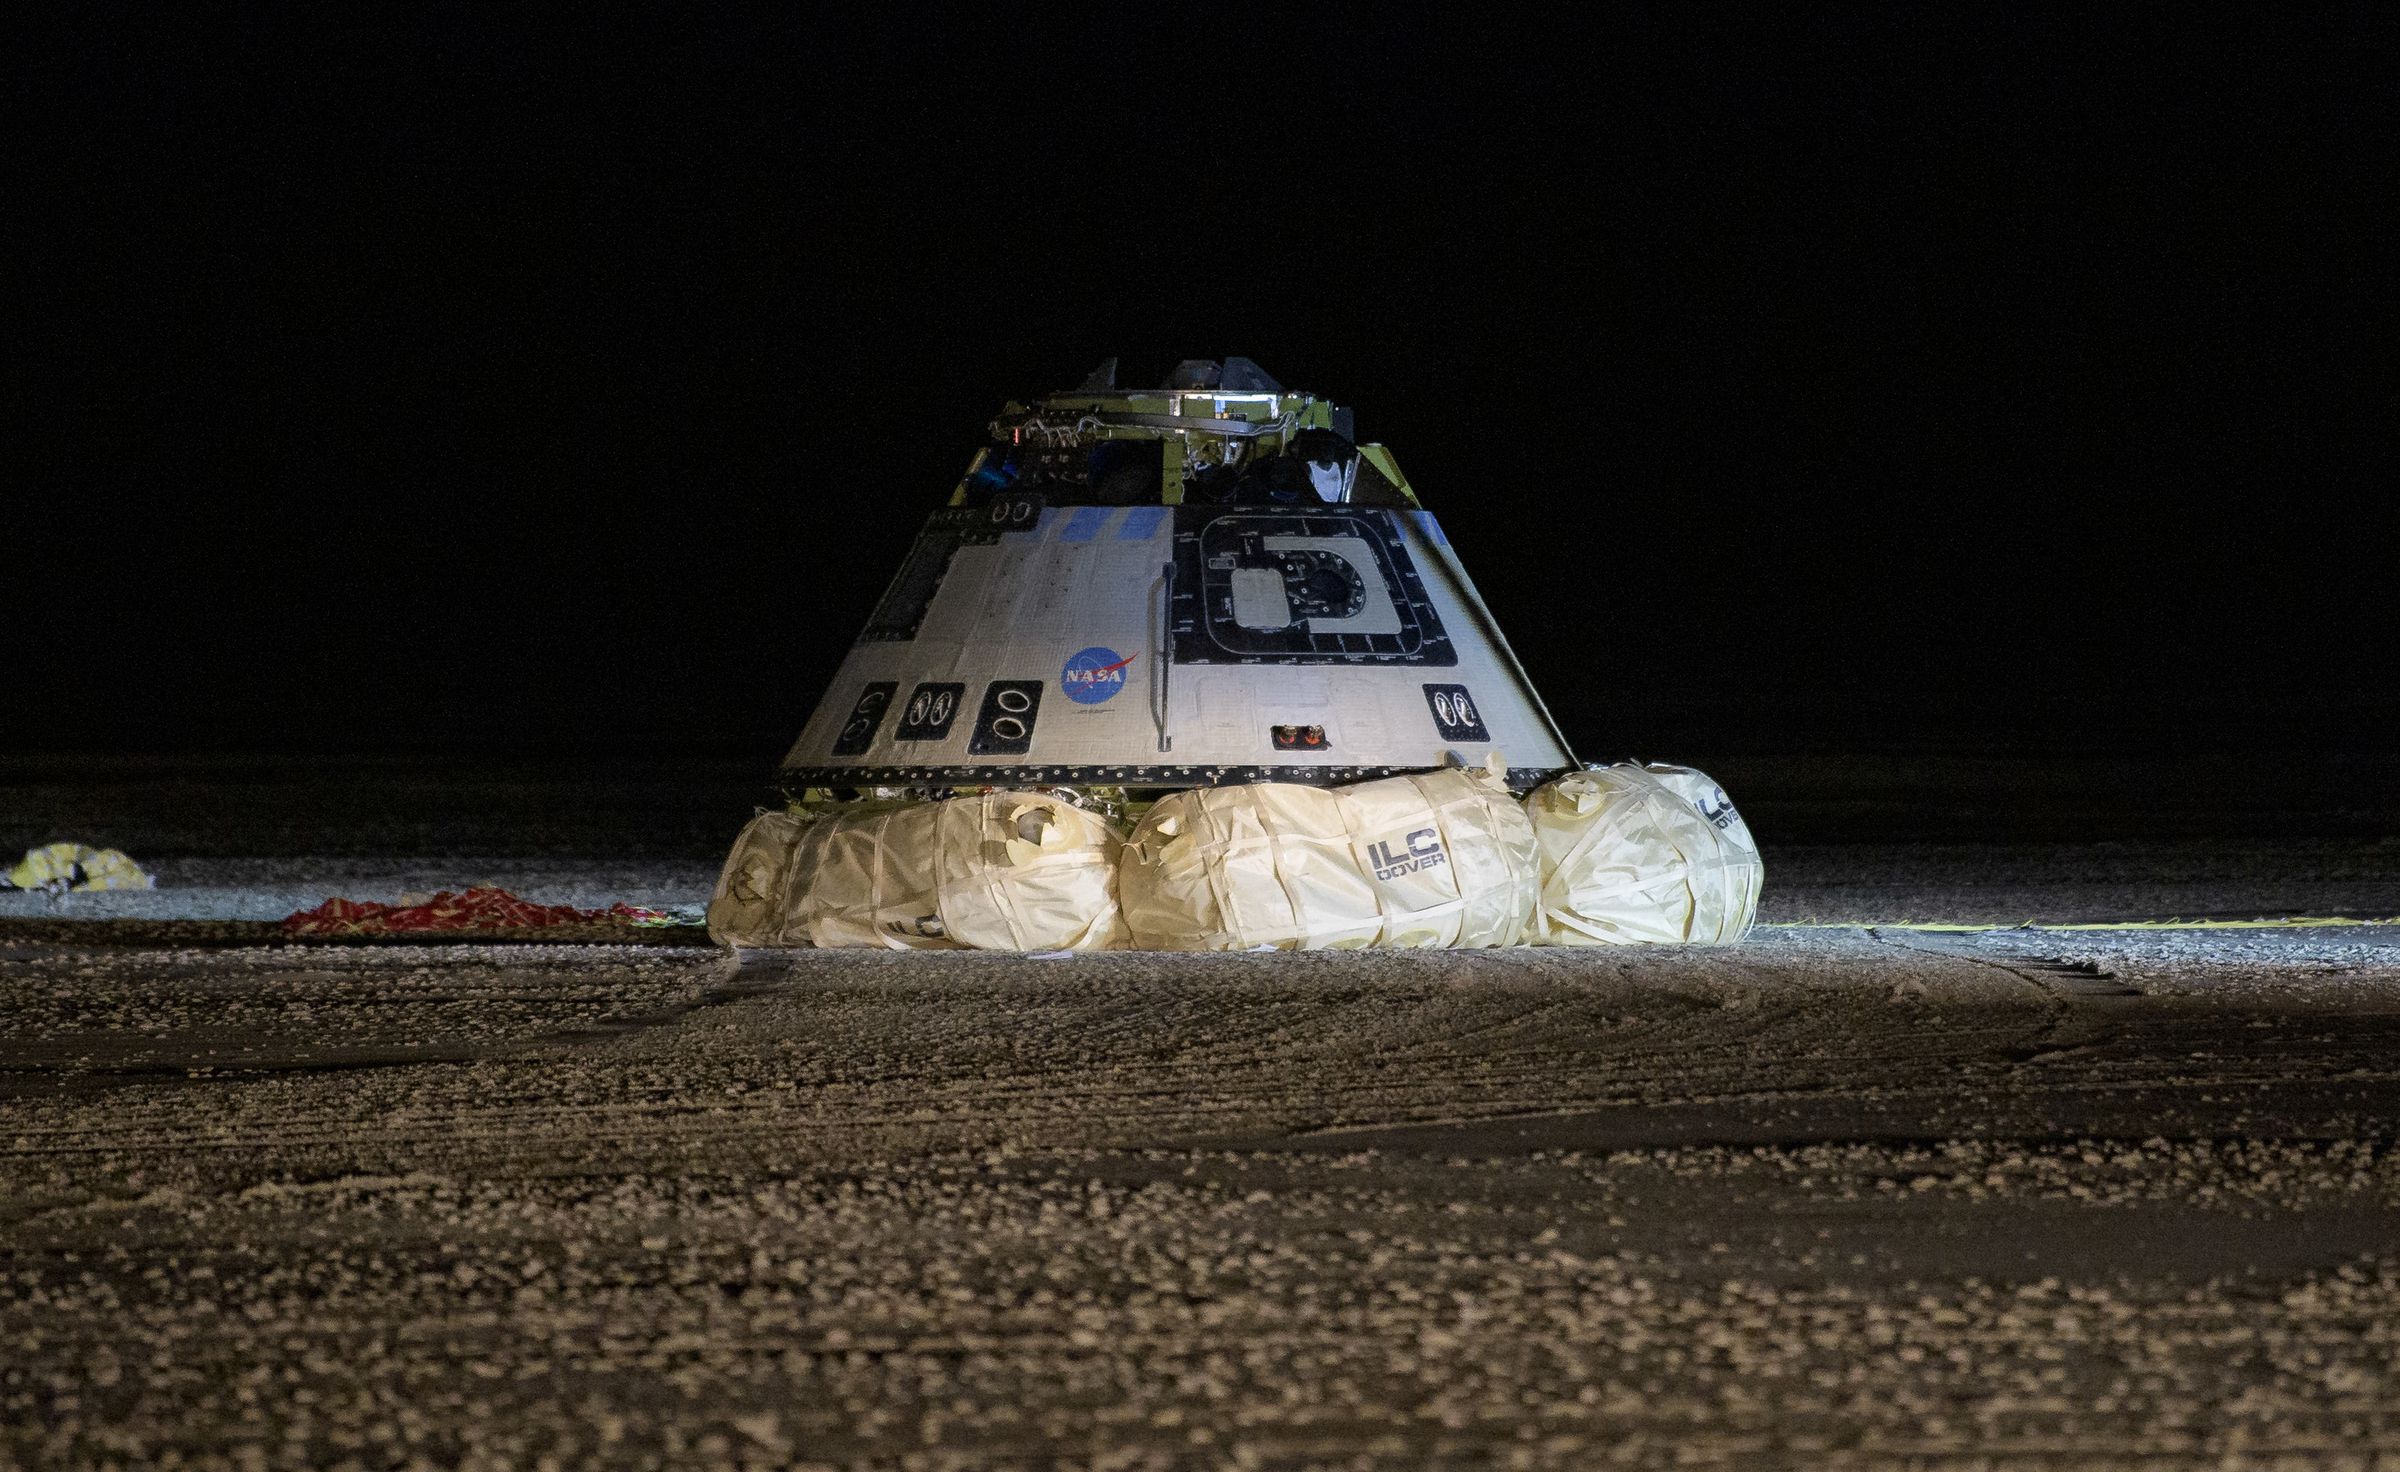 Boeing’s Starliner after landing in New Mexico, following its short flight.